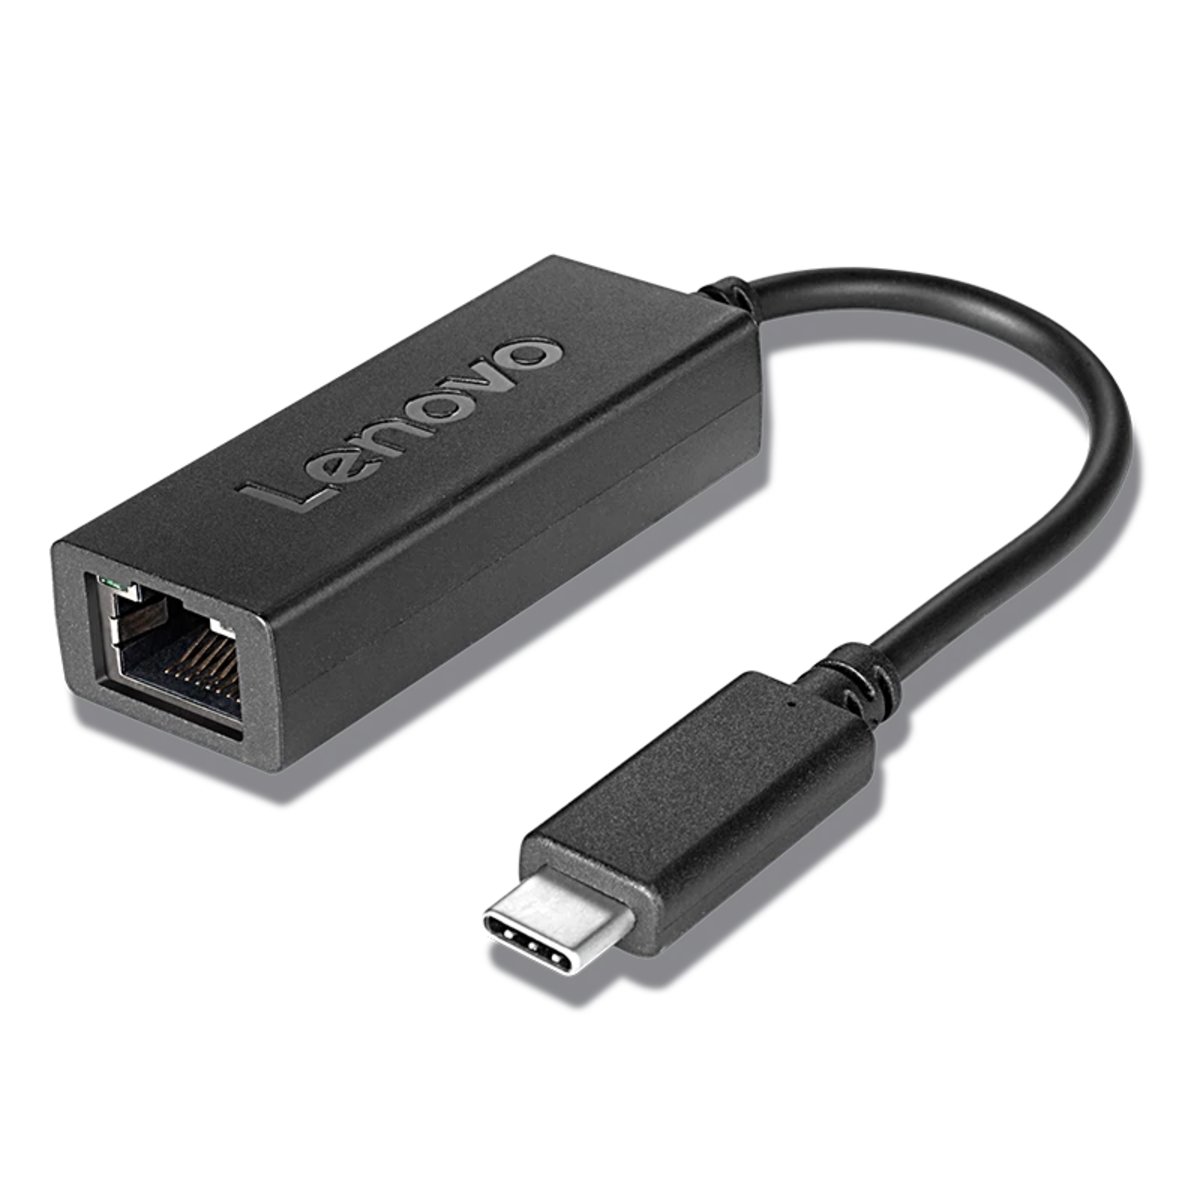 Lenovo USB-C to Ethernet Adapter #4X90s91831